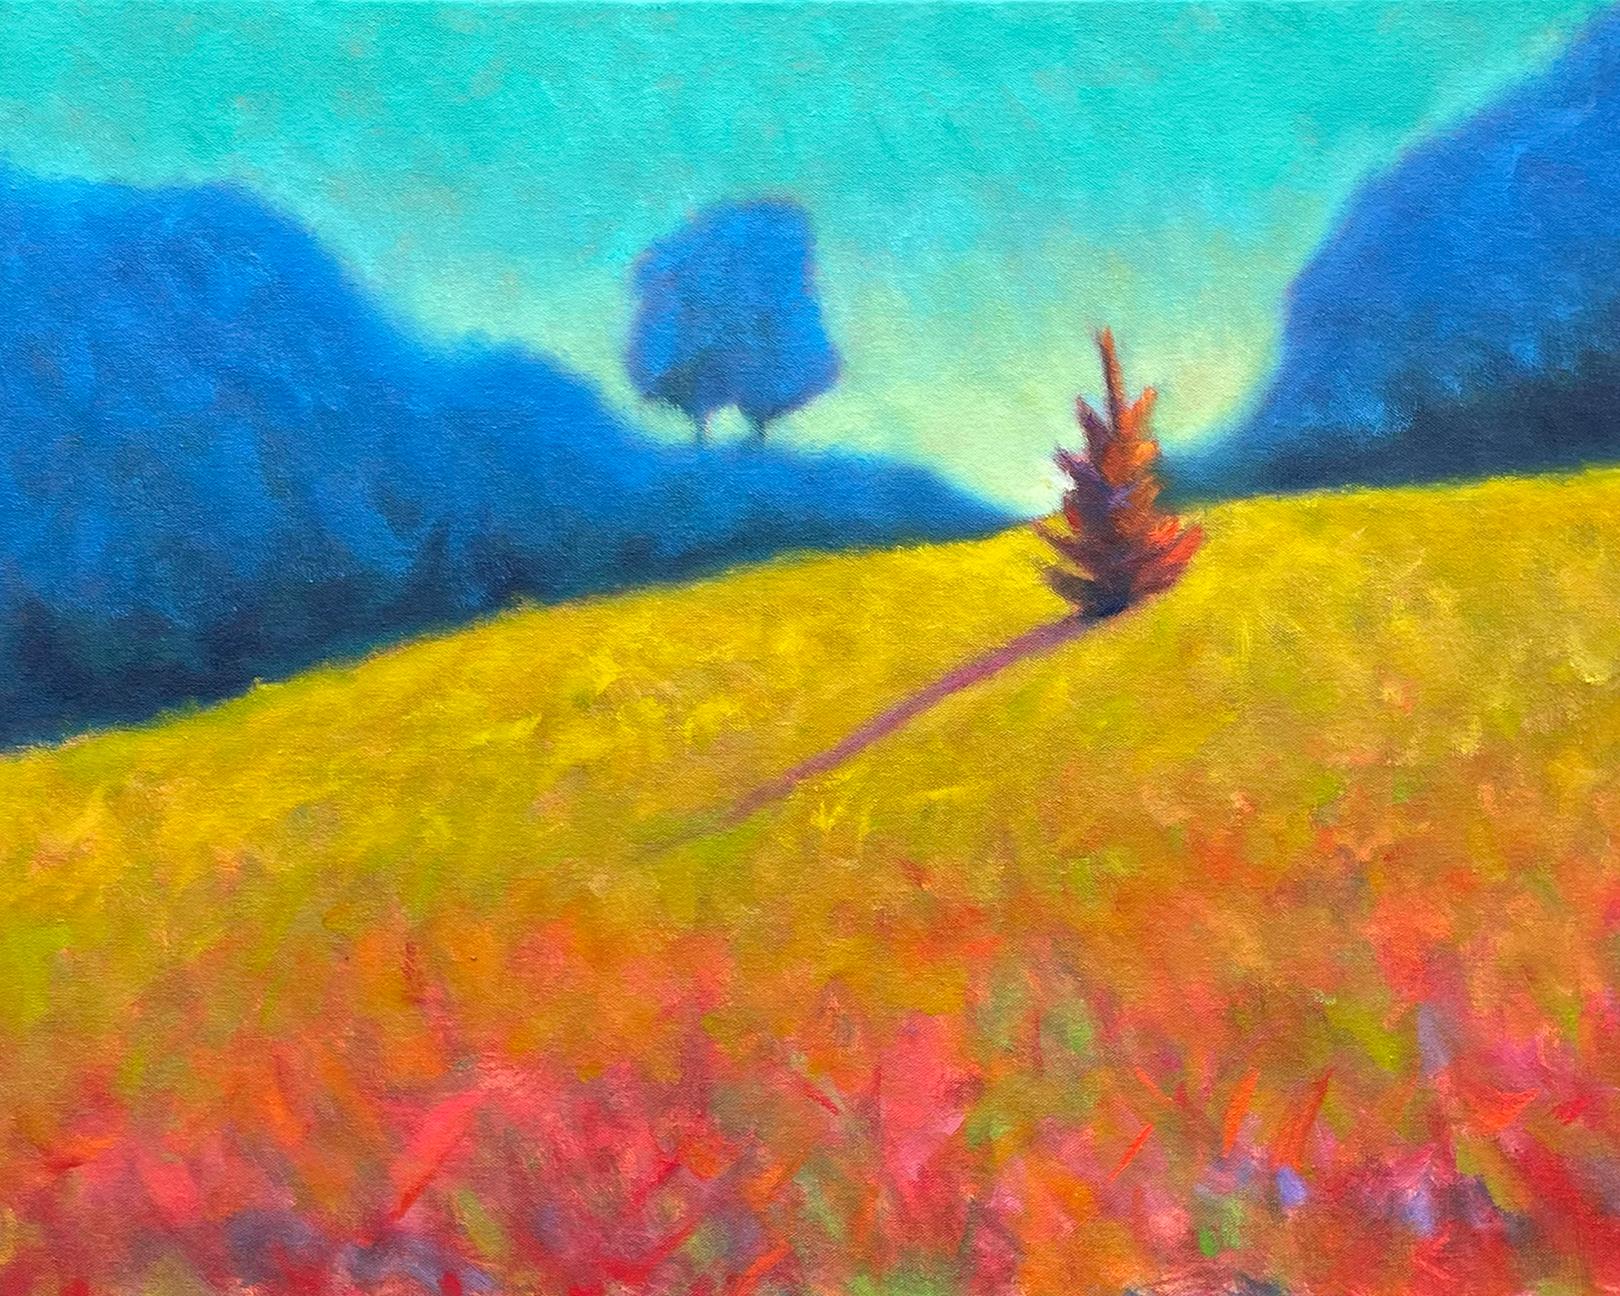 Upland Fir  Oil /Canvas  Landscape  Light & Color   New England  - American Impressionist Painting by Peter Batchelder